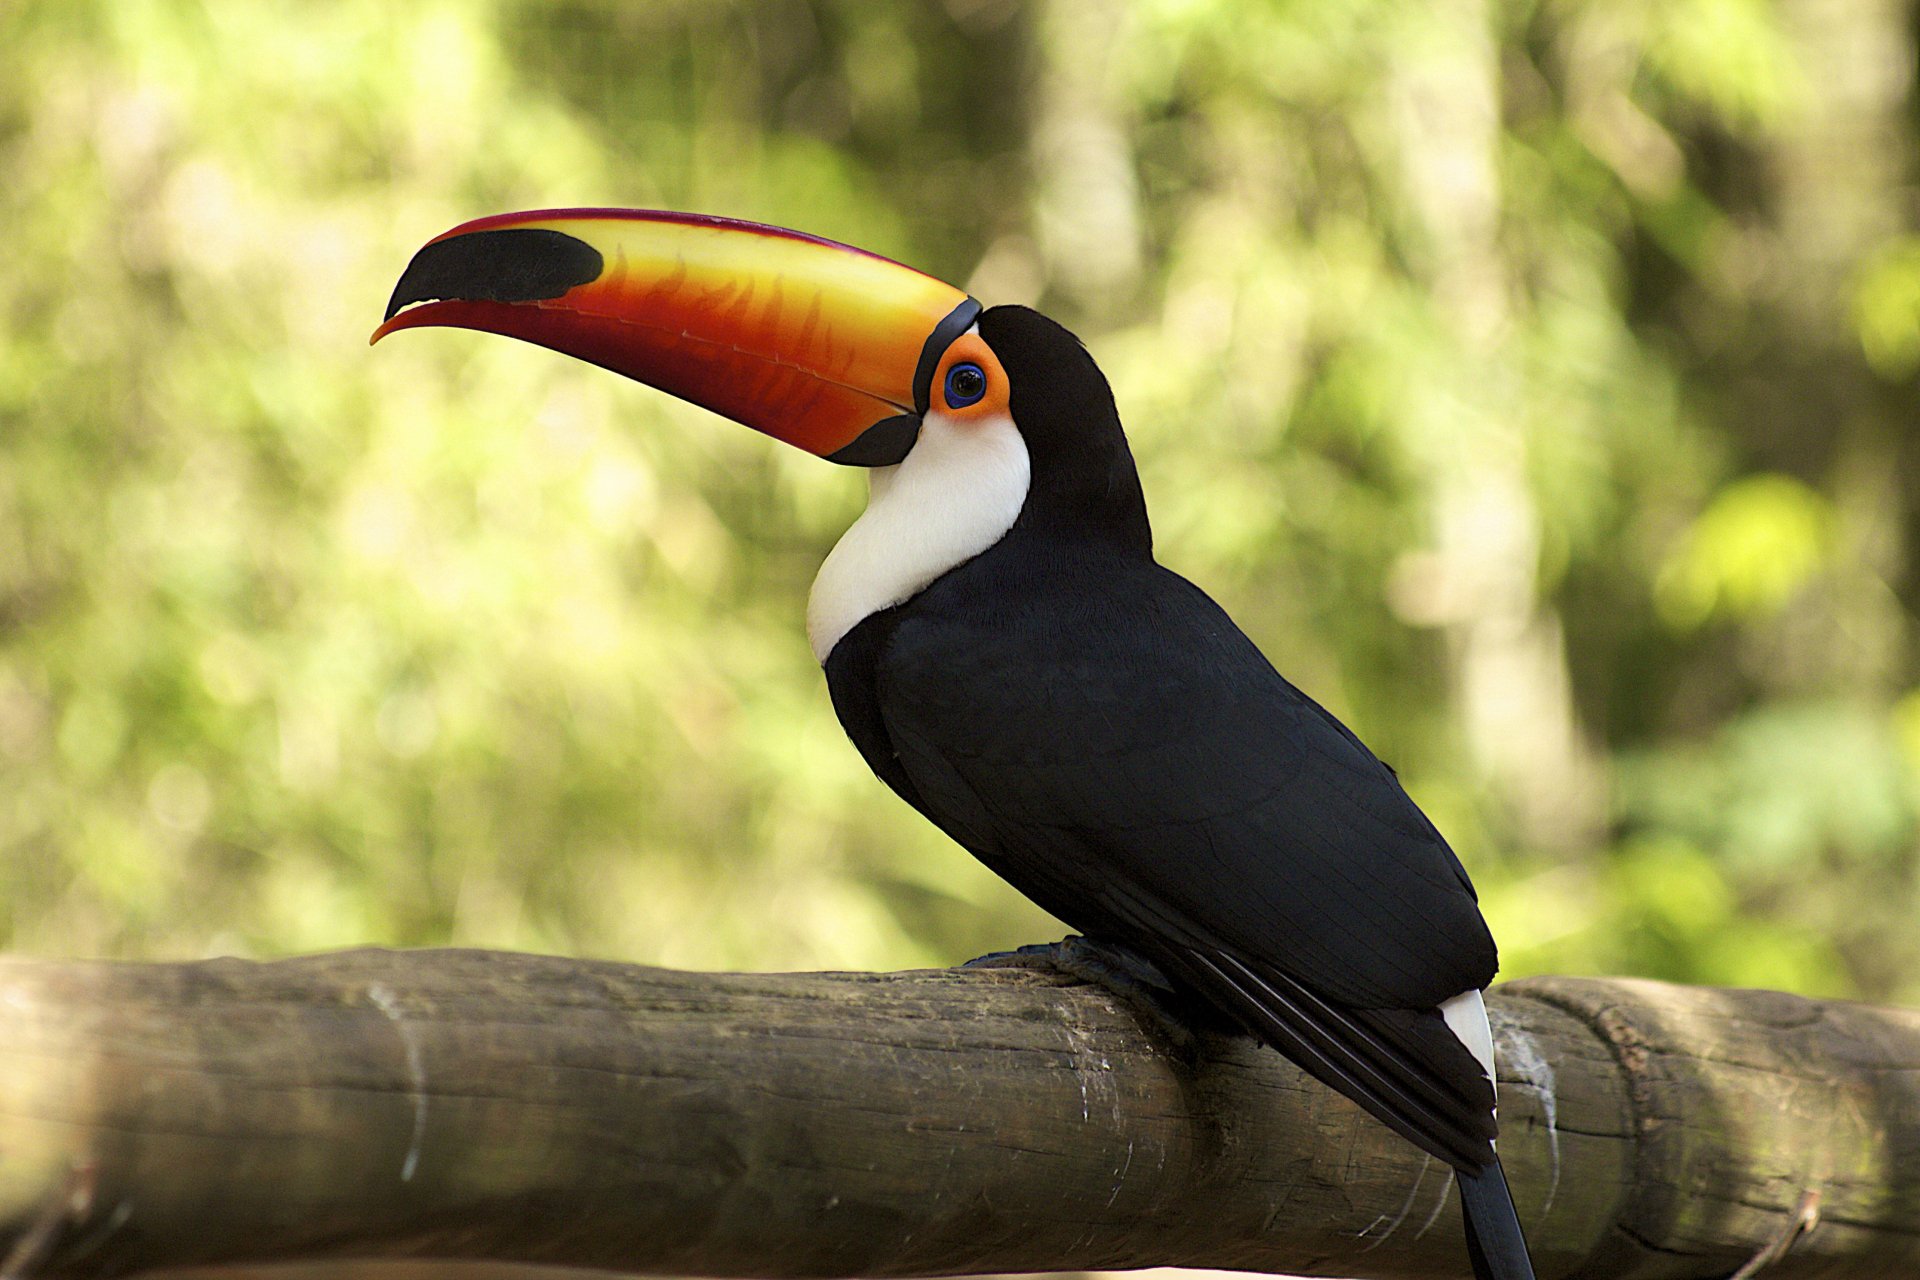 Toucan 4k Ultra HD Wallpaper and Background Image | 3888x2592 | ID:572386